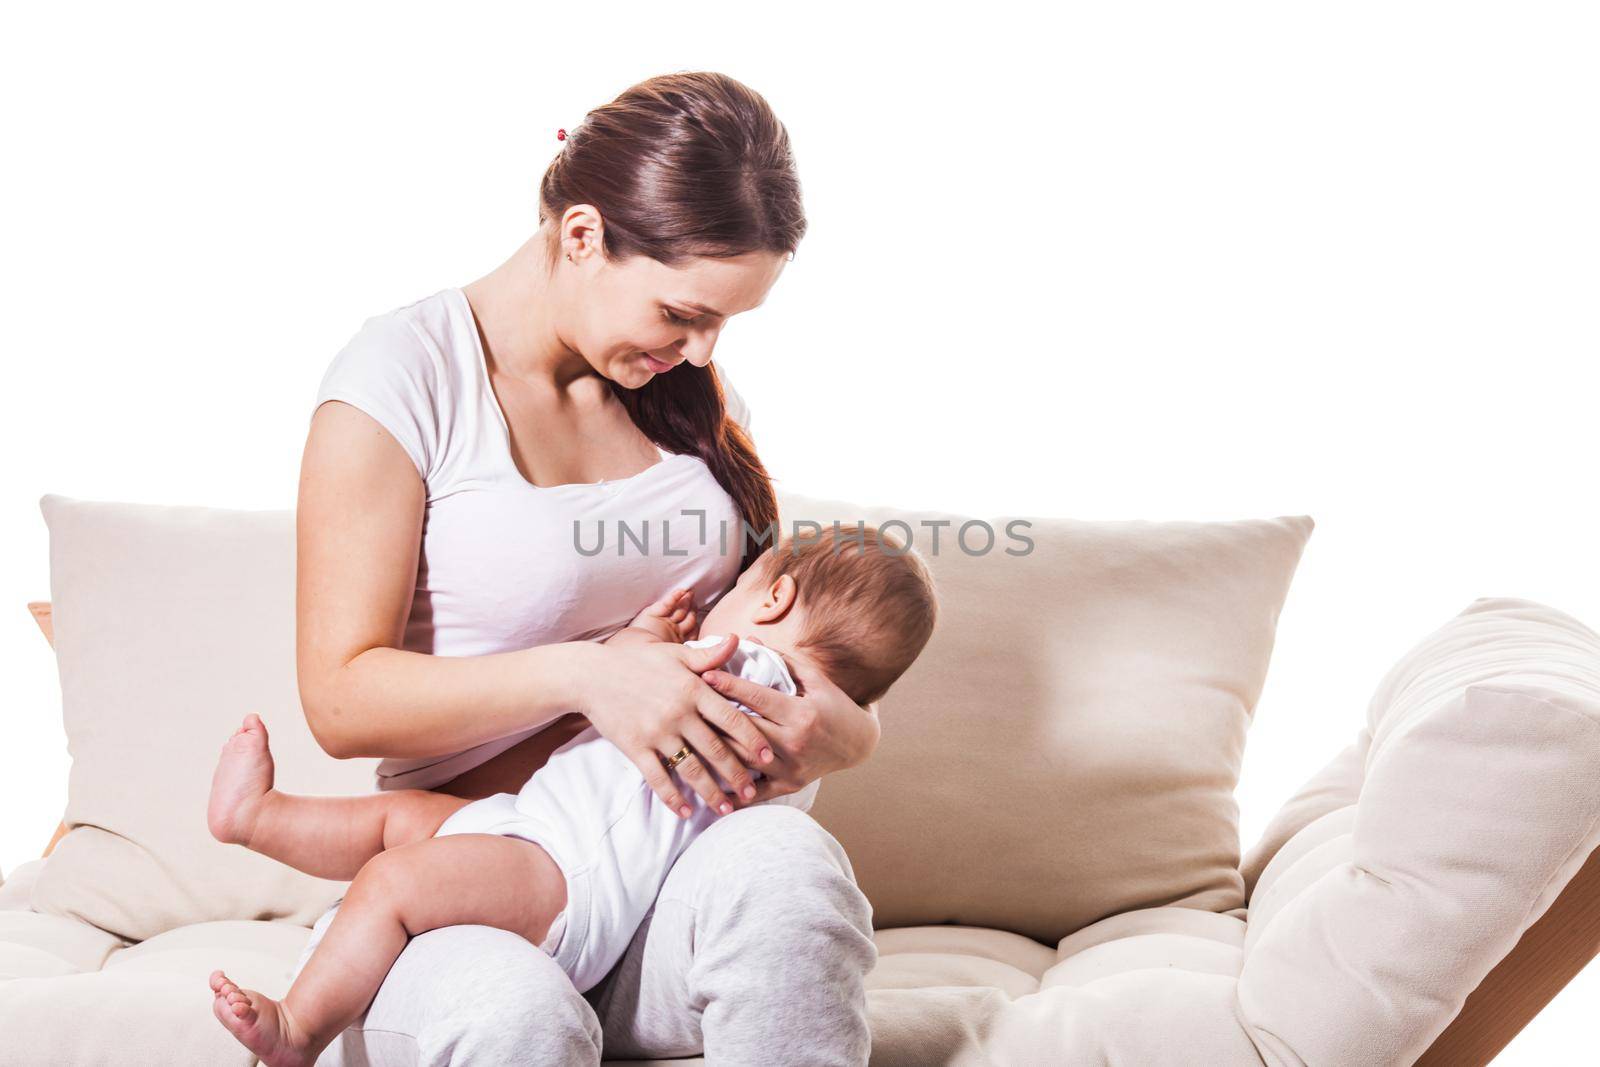 The young woman begins to breastfeed her baby while sitting on the couch